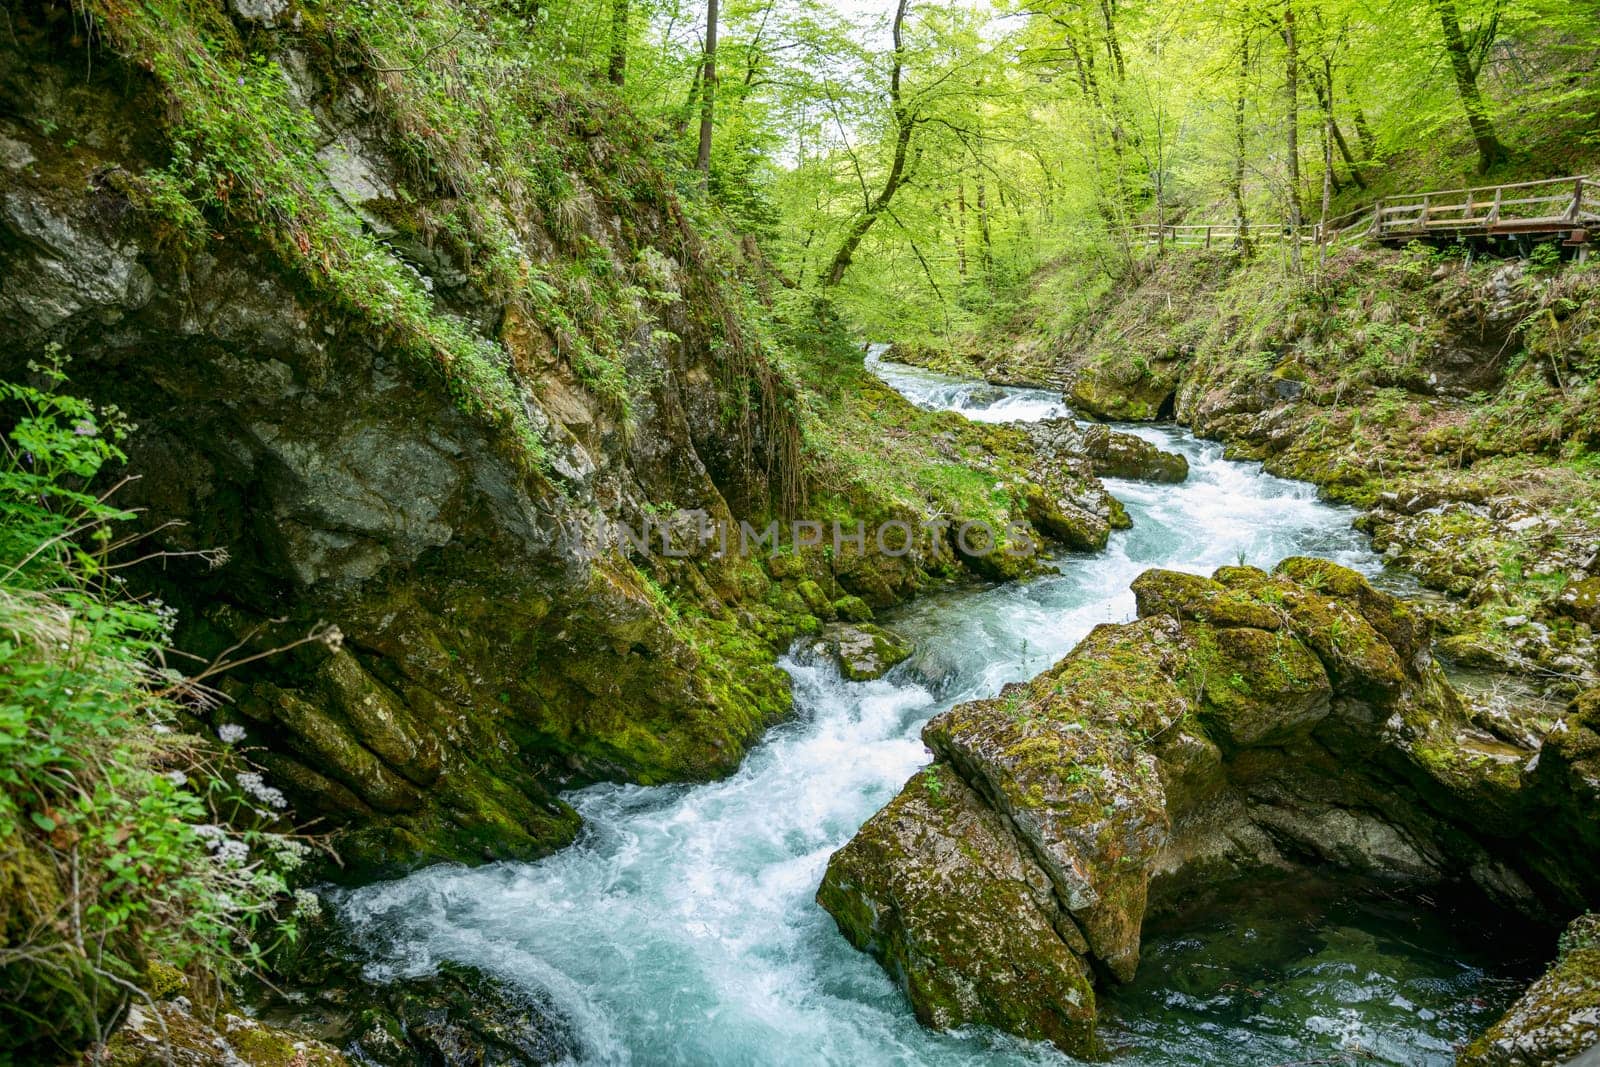 Vintgar gorge waterfall in Slovenia, Triglav national park. Pure fresh water in beautiful nature and forest. Tourist paths near waterfalls